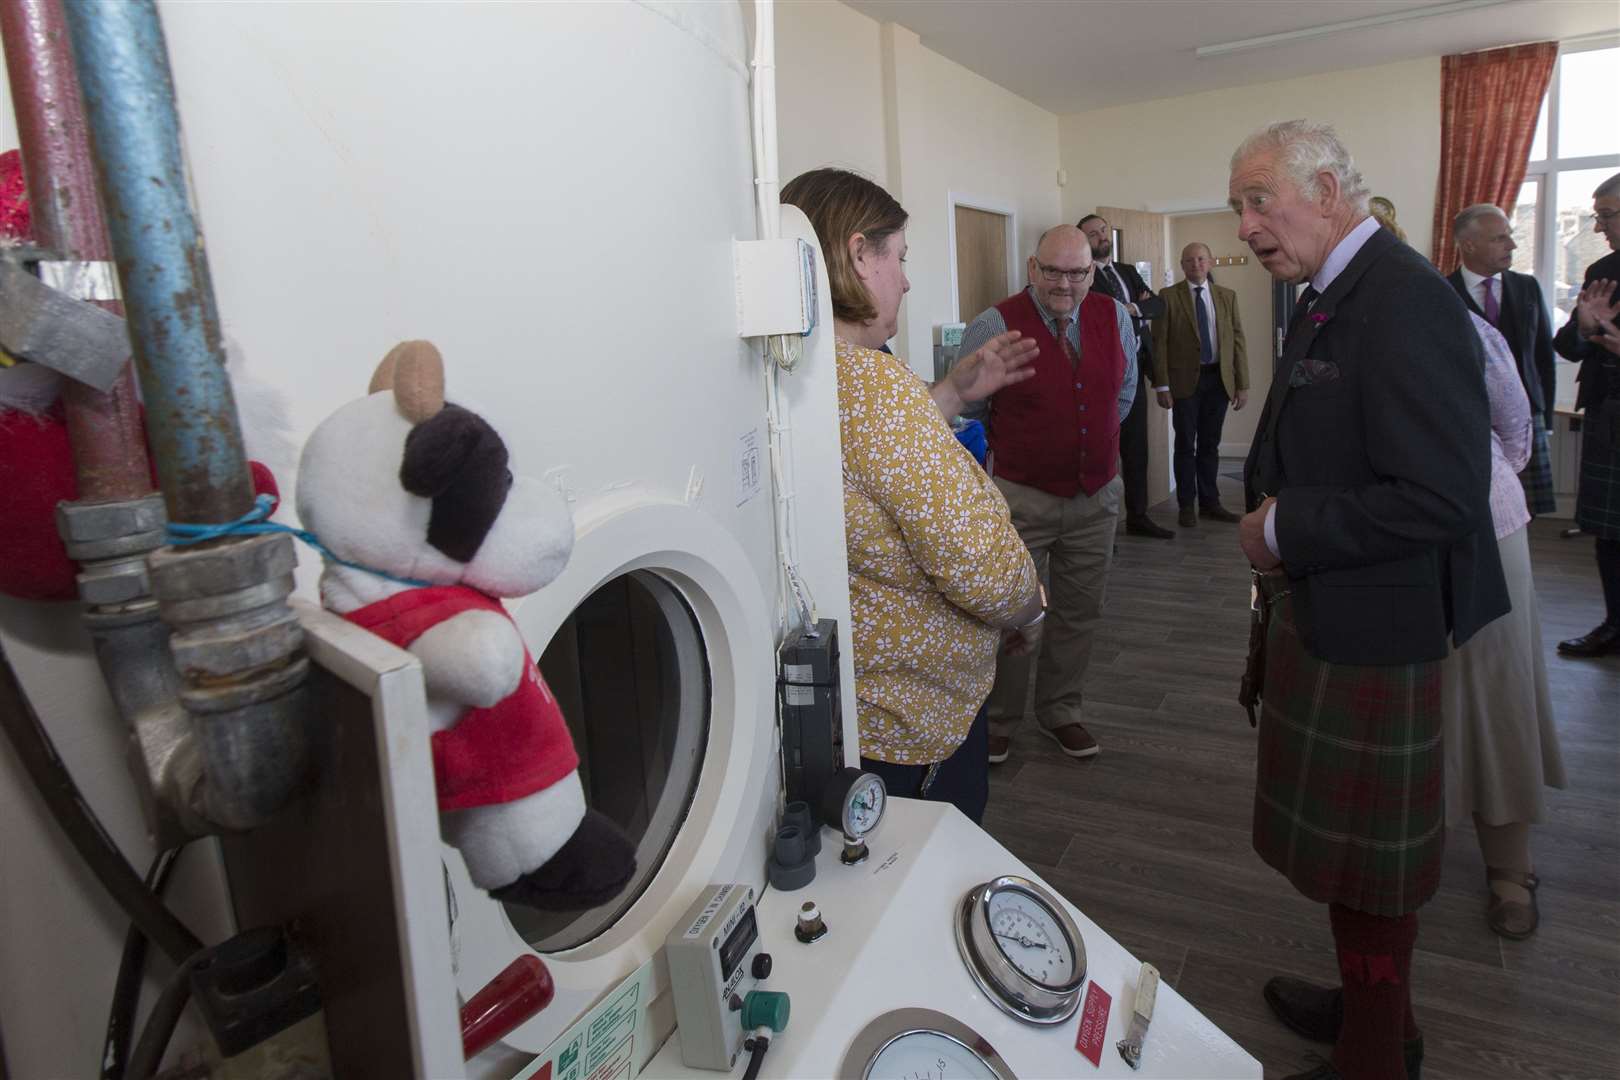 The Duke of Rothesay speaking to Diane Malcolm, who had just emerged from a session in the barochamber. Looking on is Stephen Lay, who also makes use of the Healing Hub. Picture: Robert MacDonald / Northern Studios